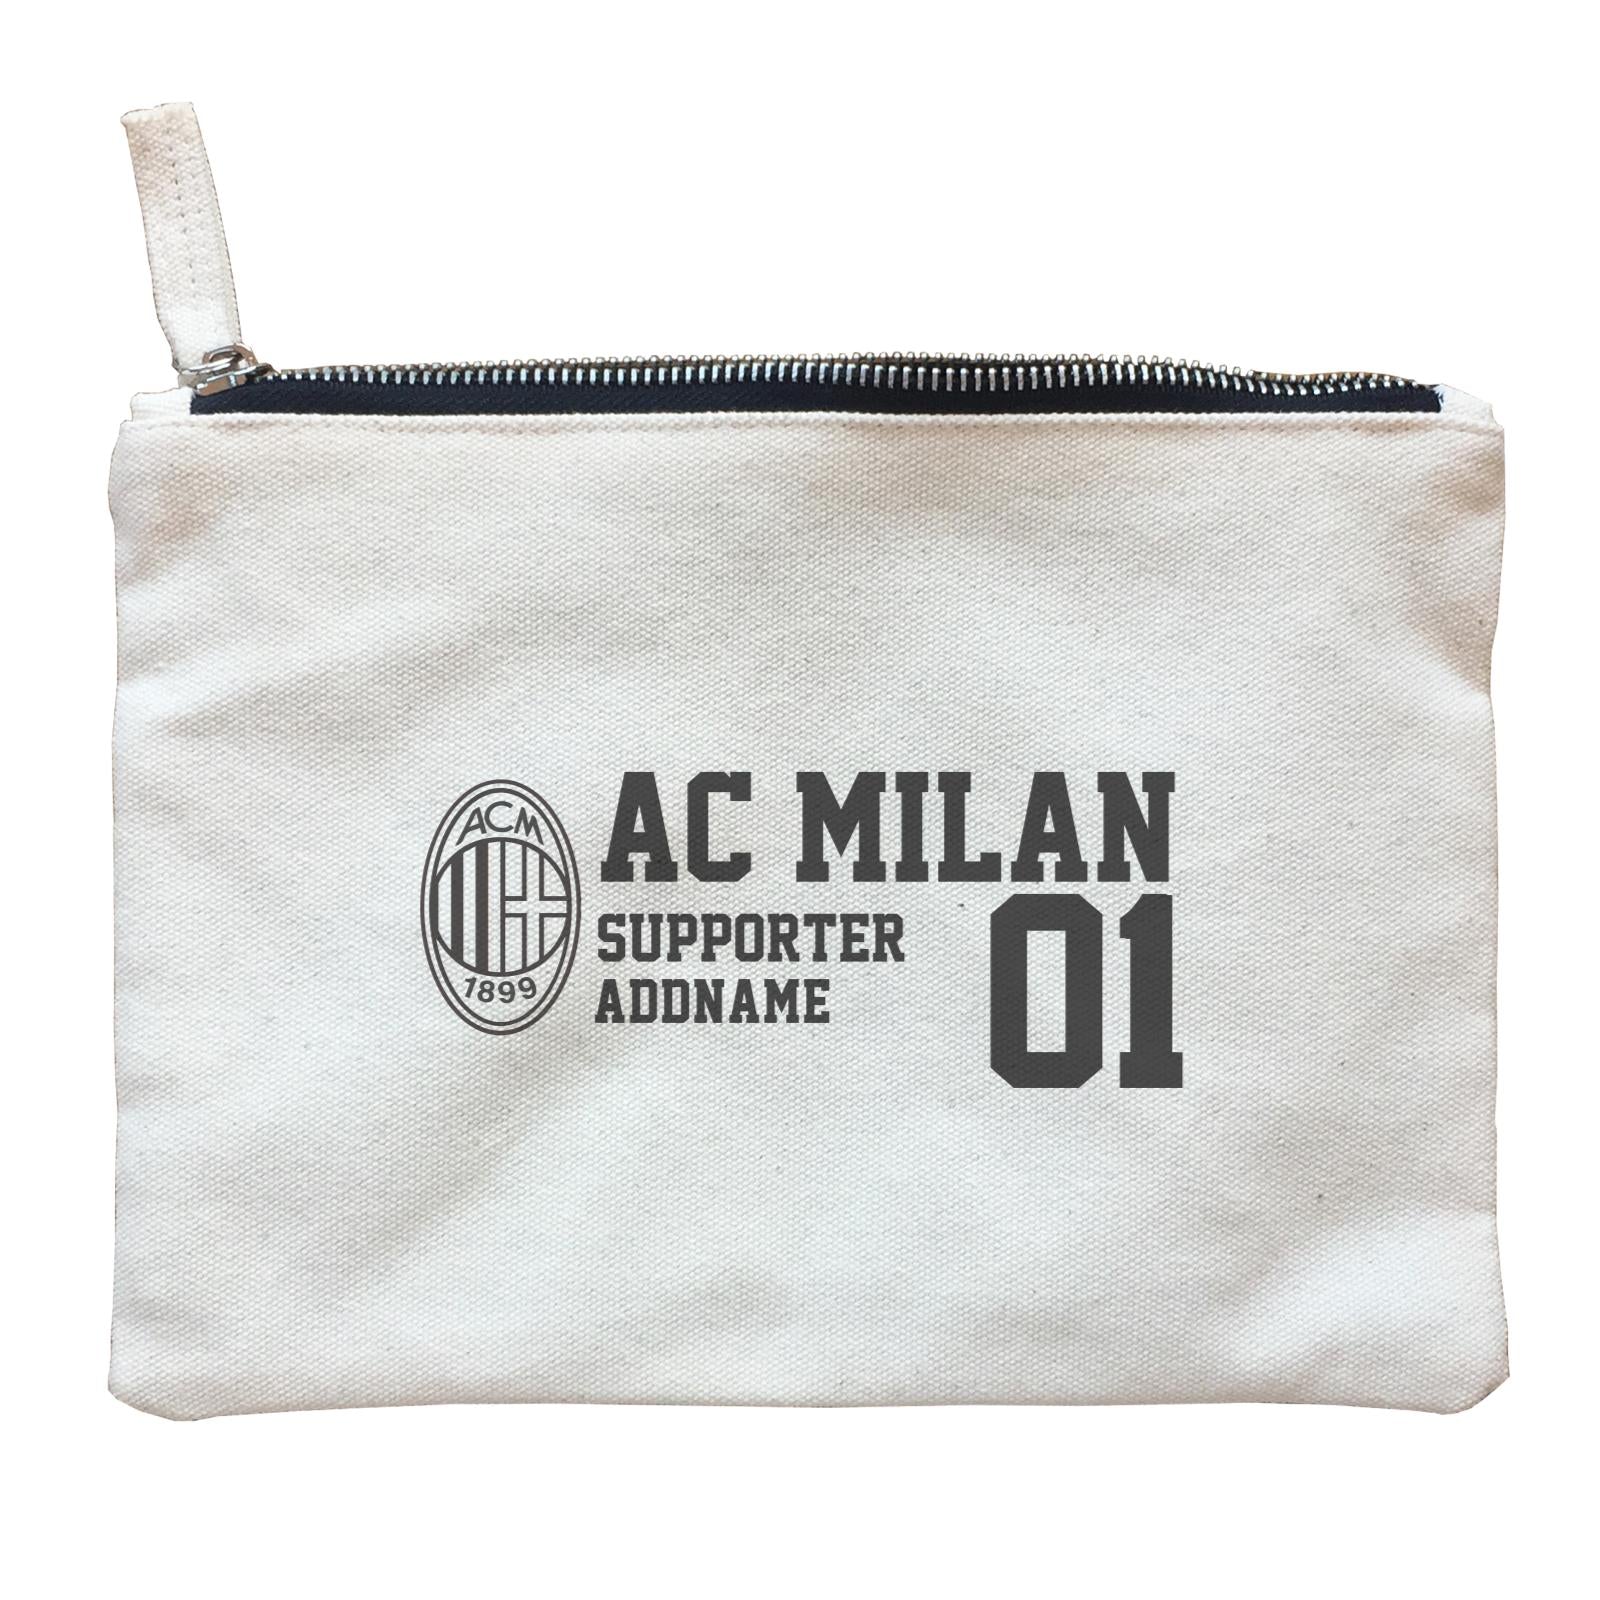 AC Milan Football Supporter Accessories Addname Zipper Pouch